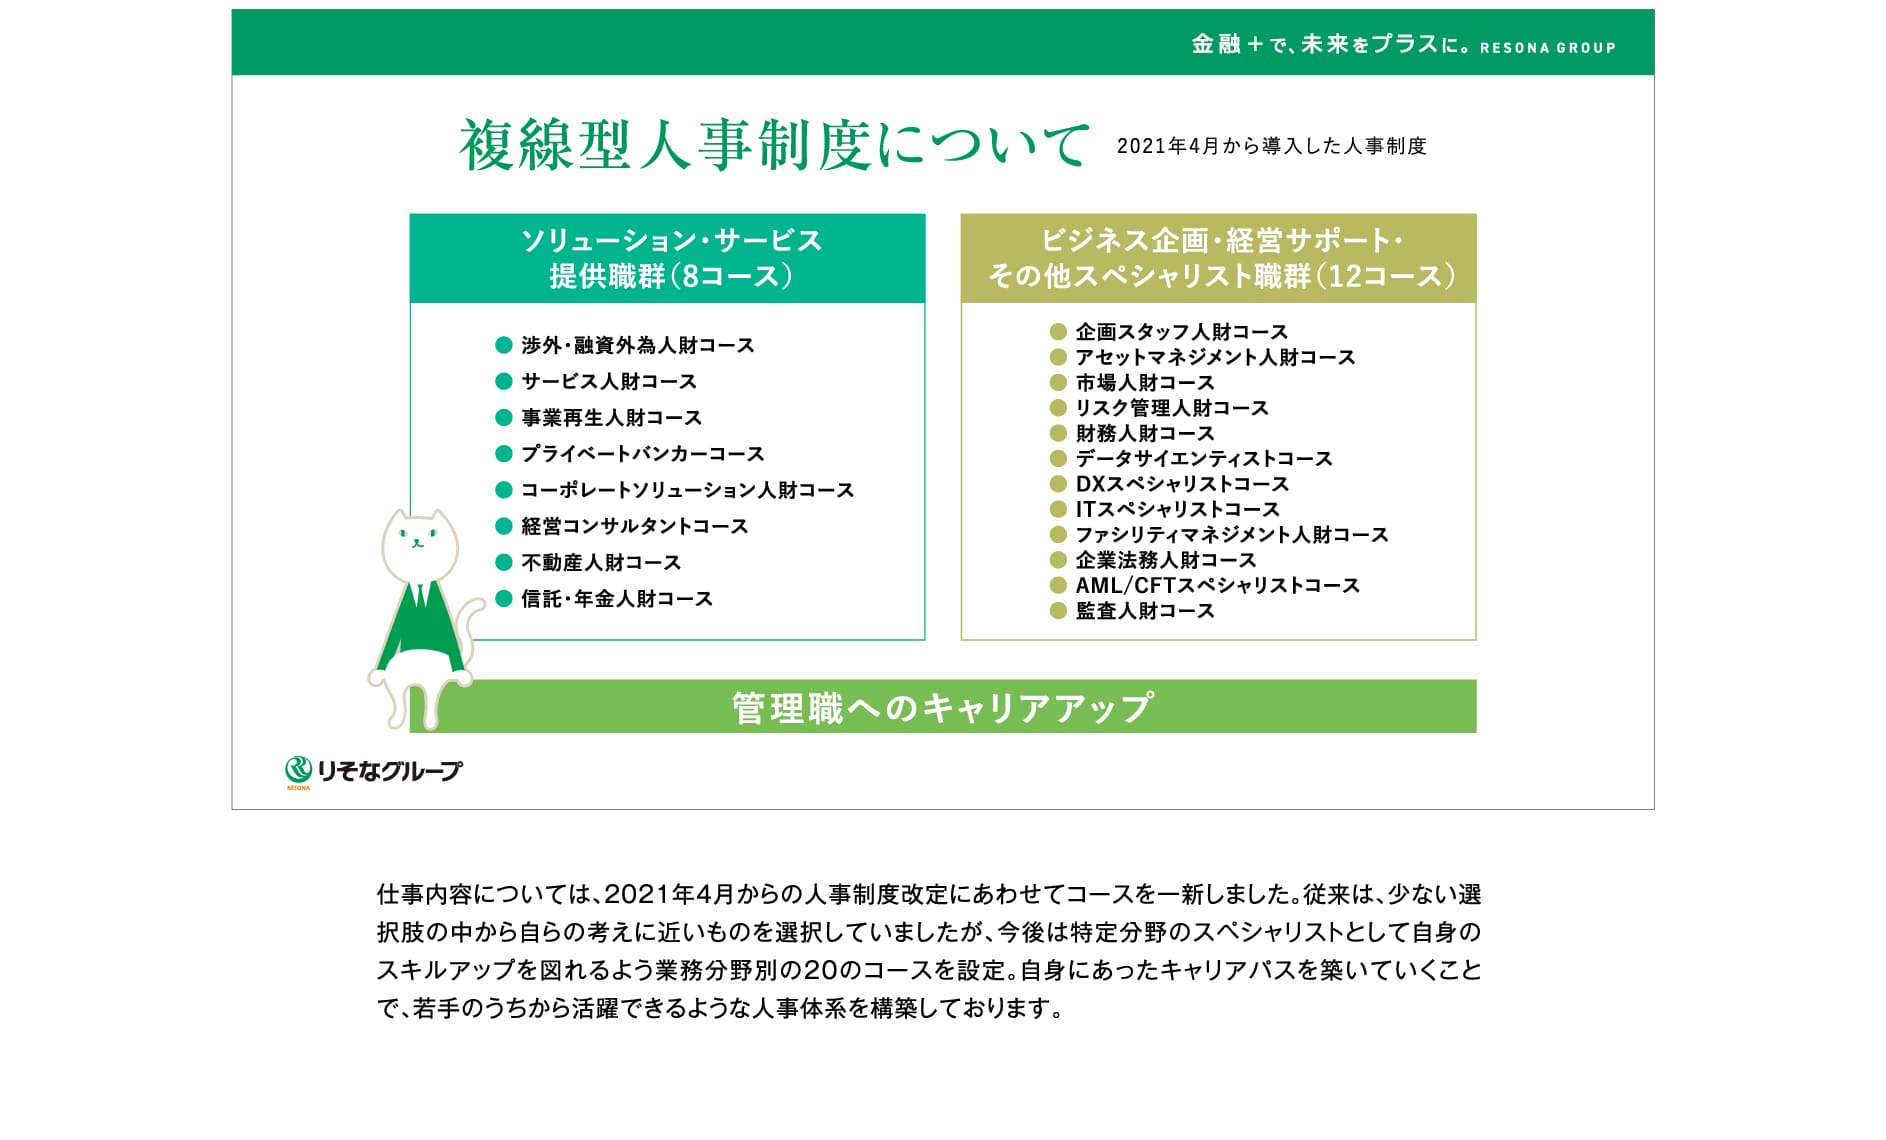 BUSINESS FIELD 「りそな」を前進させる人財と仕事